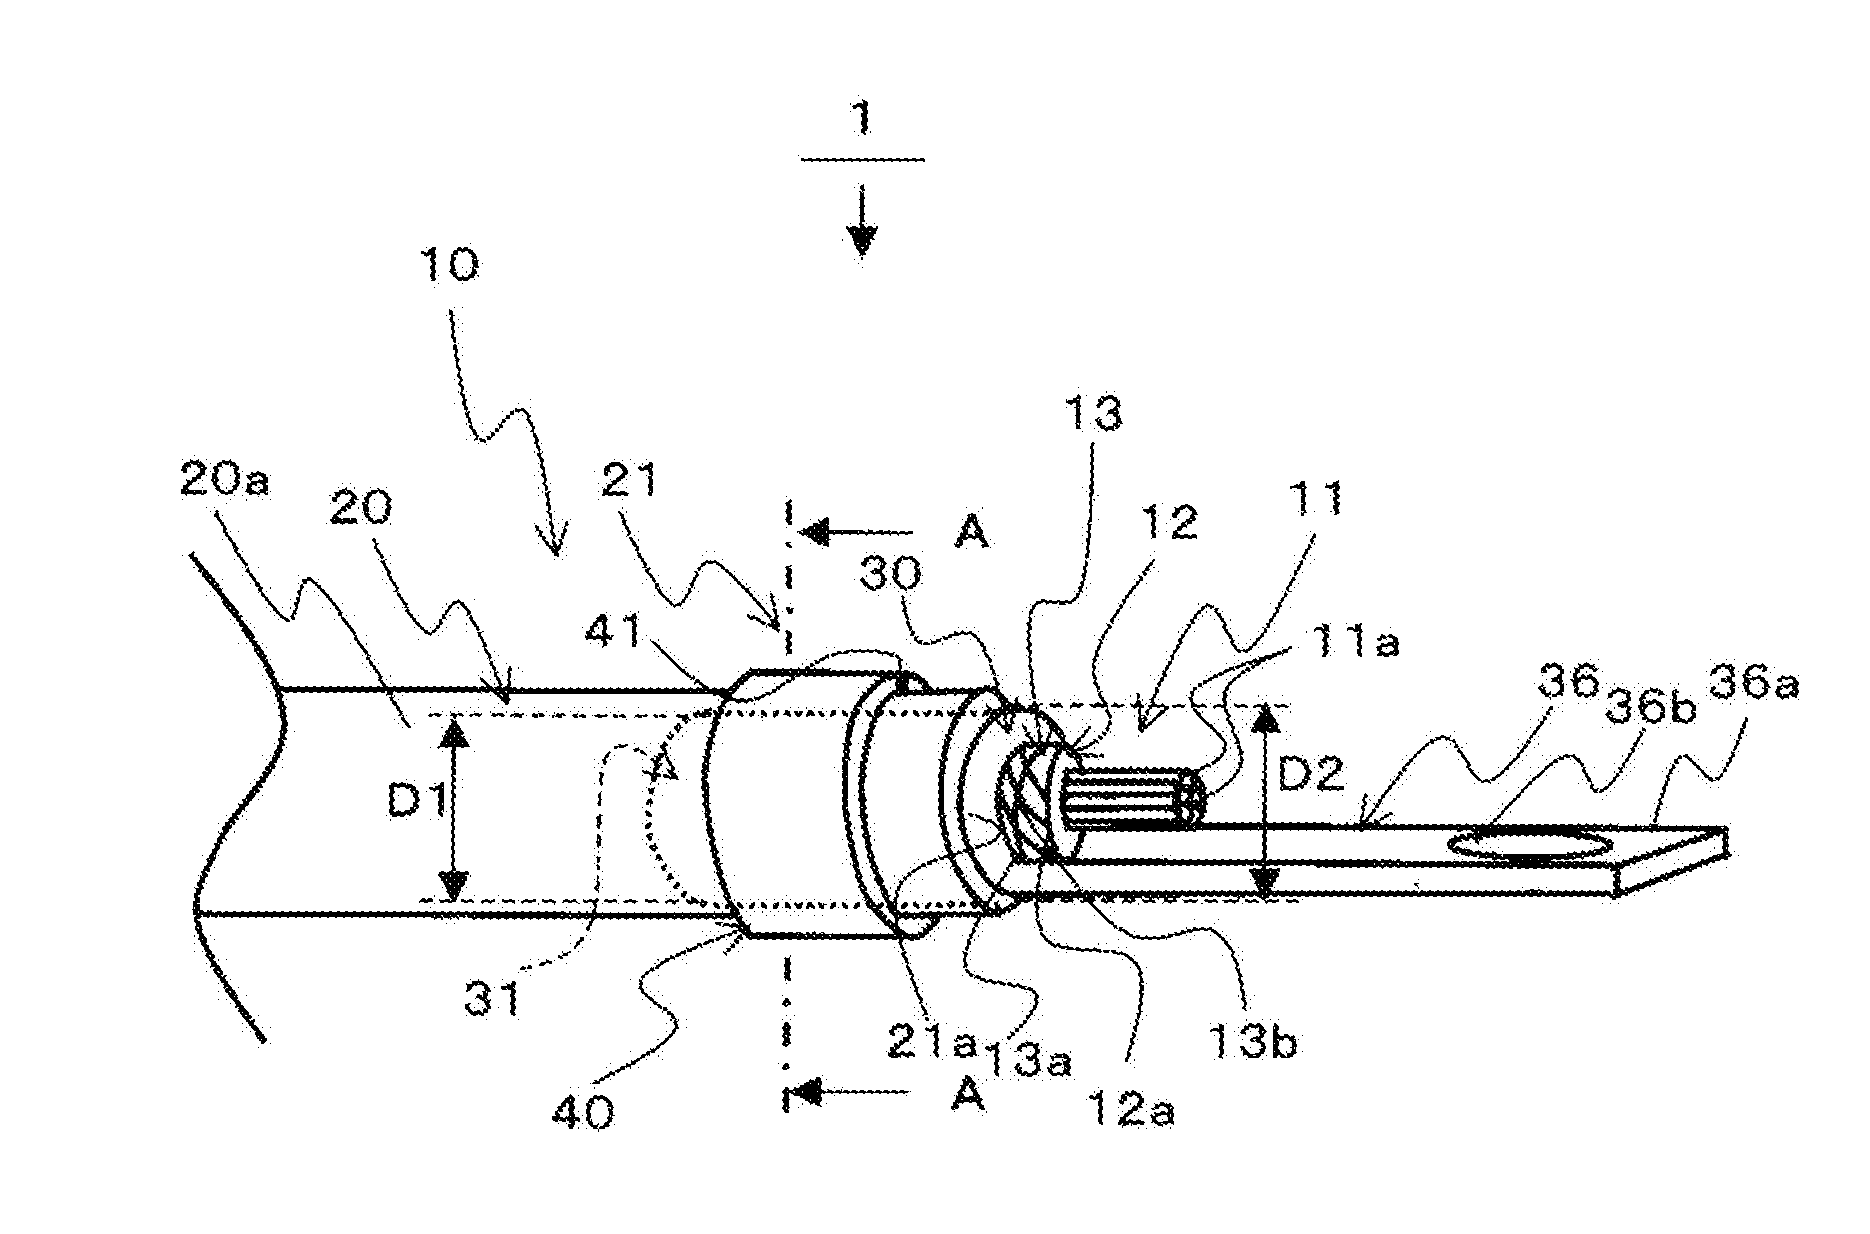 Structure of connection between coaxial cable and shield terminal, and method of connection therebetween